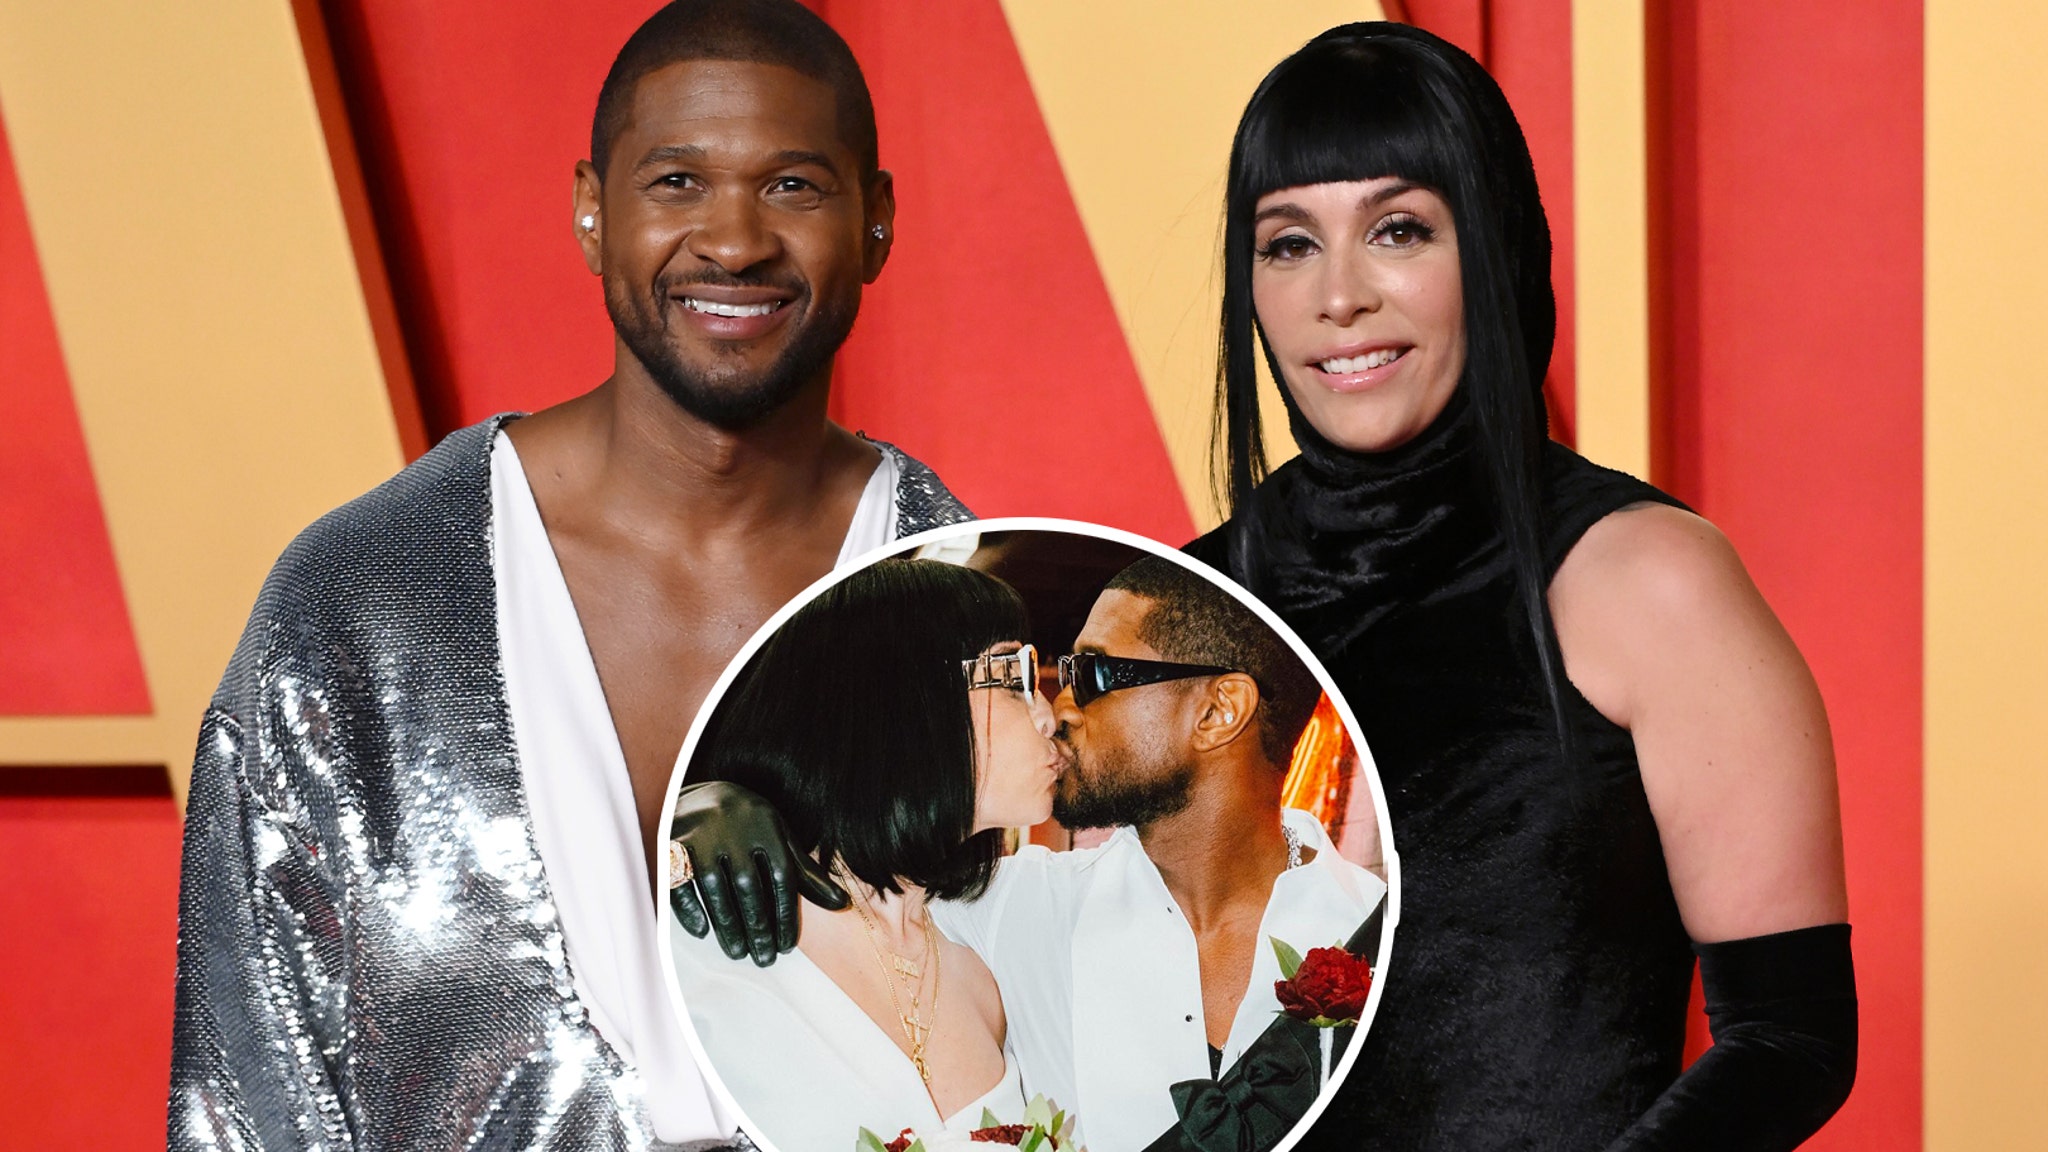 Usher Dishes on Las Vegas Wedding, Says 'Everybody' Including Family Were 'Surprised'